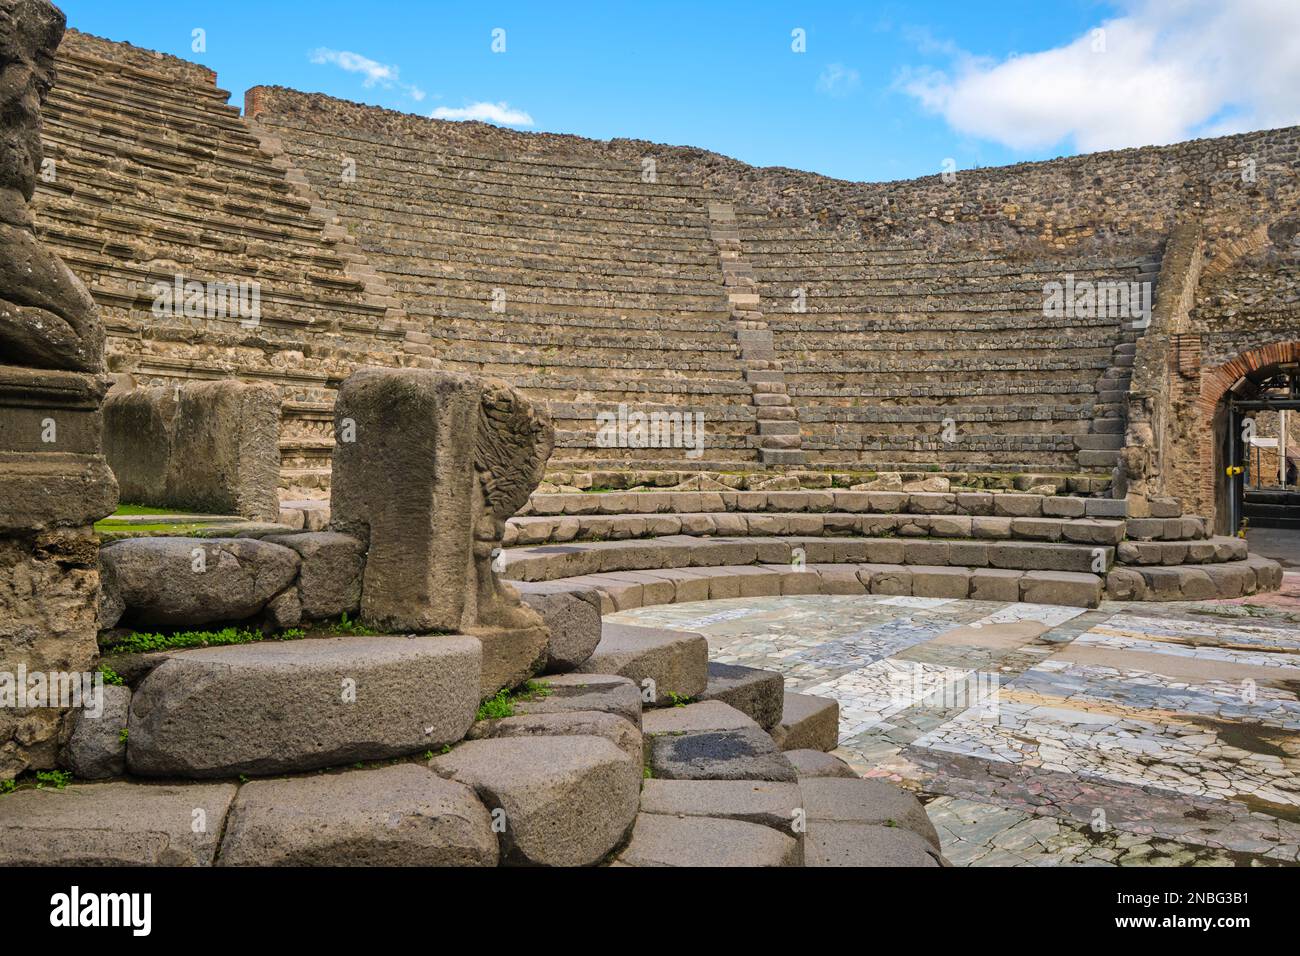 A view of the stone seating at the cute, little, small Teatro Piccolo Odeon theater. At Pompeii Archaeological Park near Naples, Italy. Stock Photo